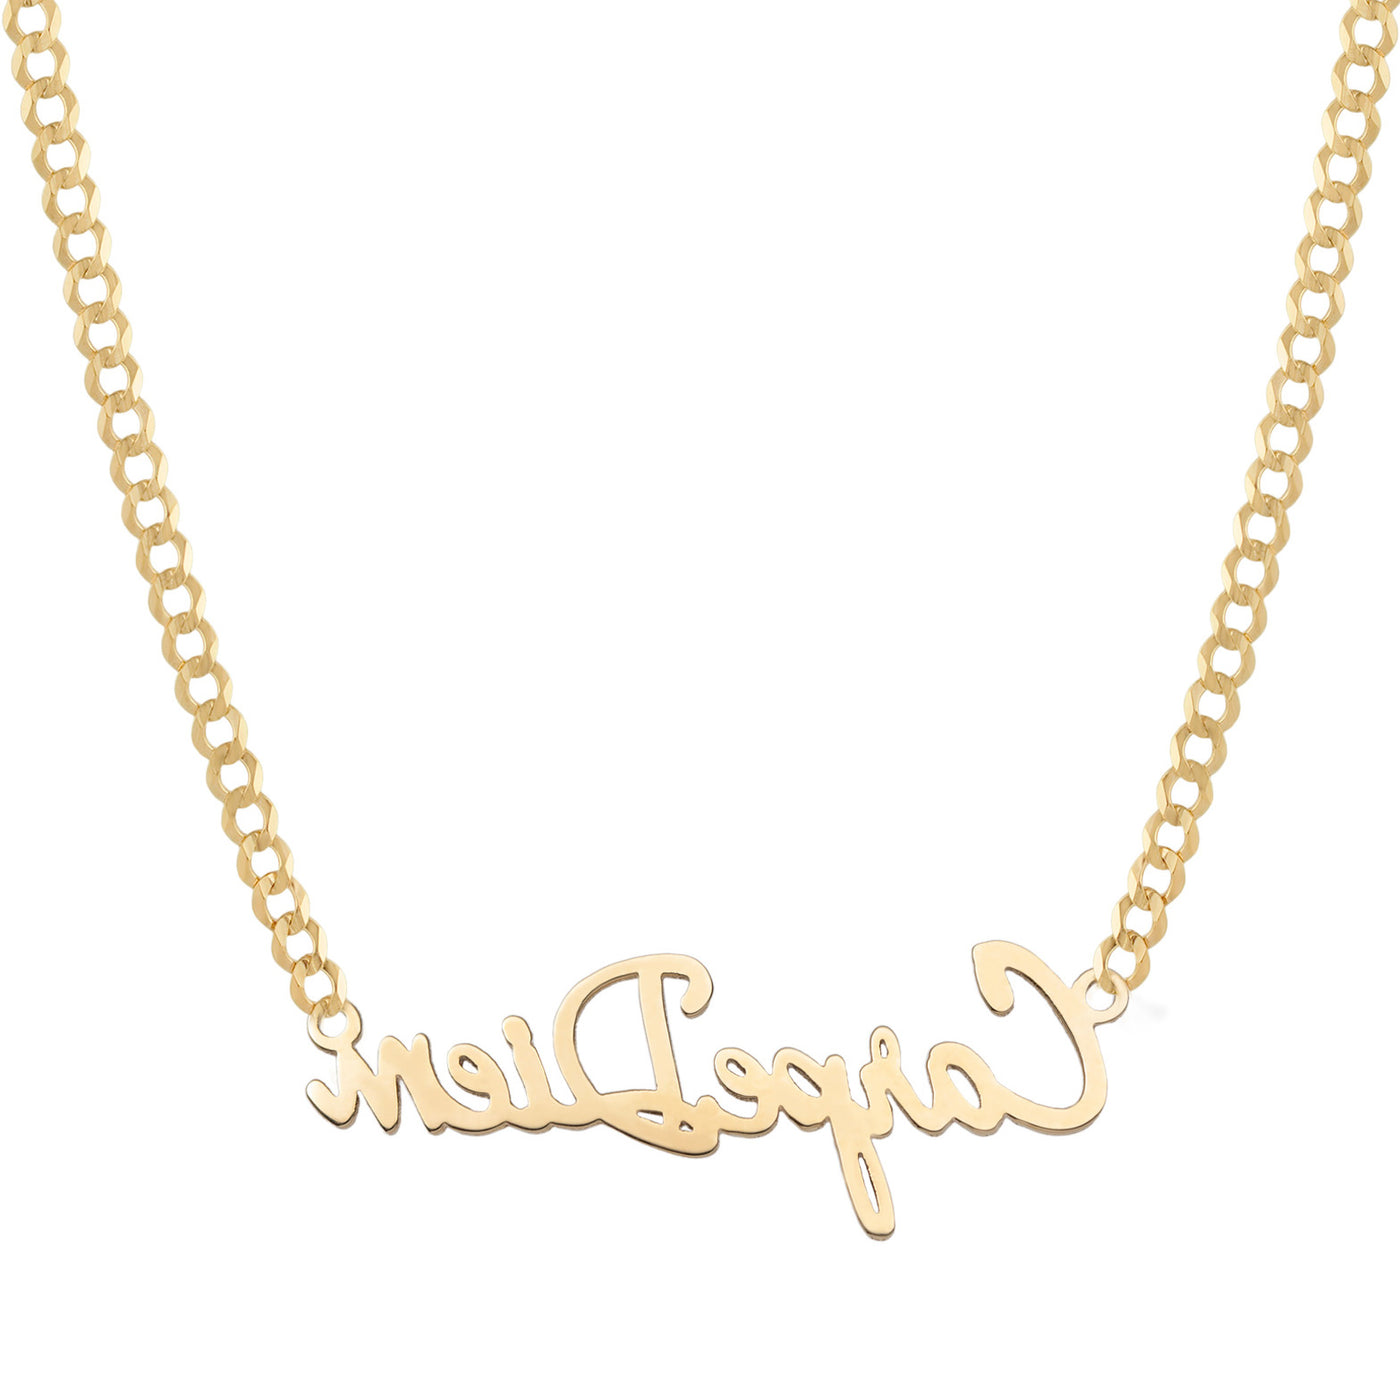 Ladies Script Name Plate Necklace 14K Gold - Style 105